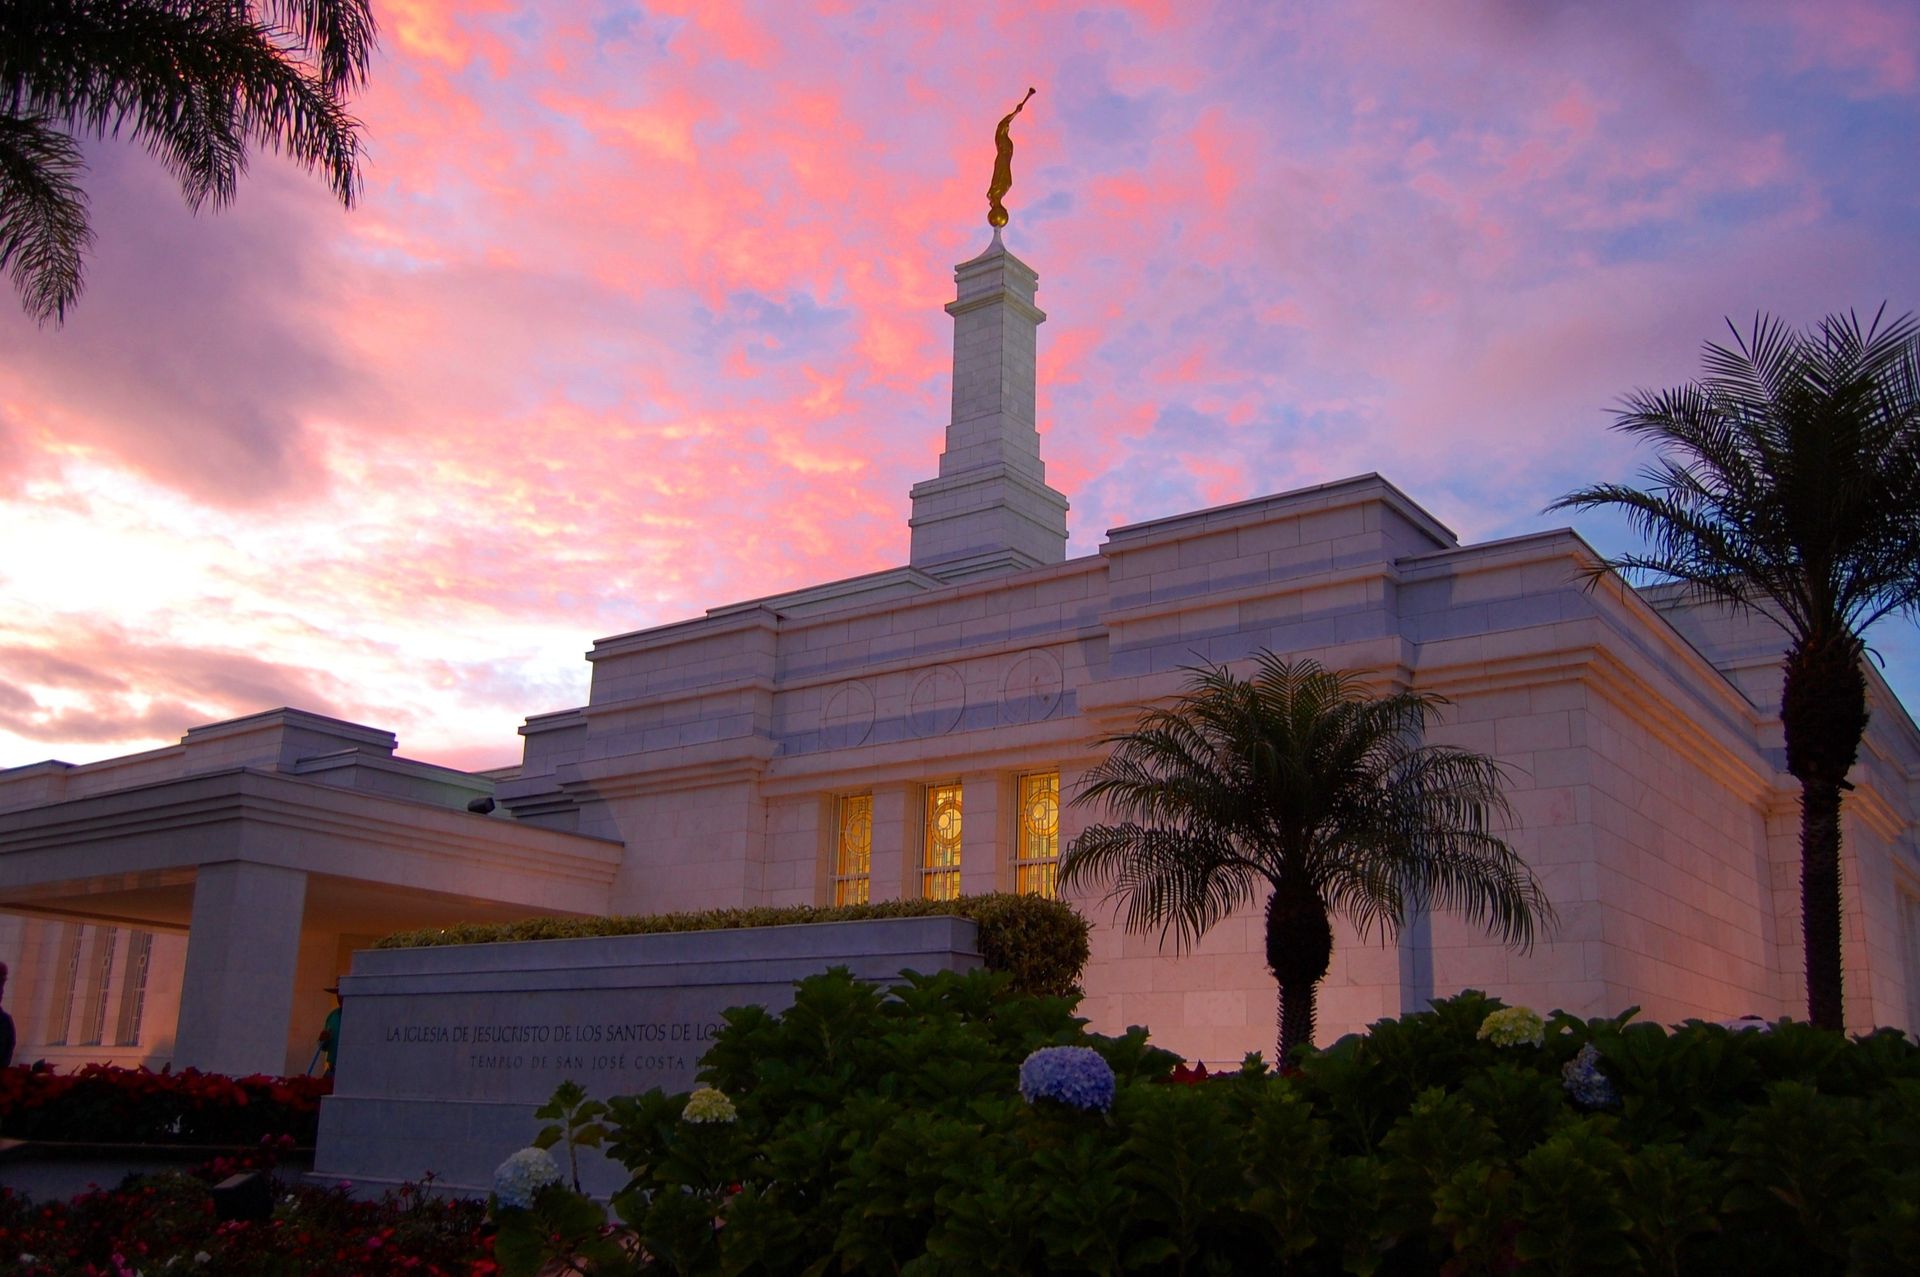 The San José Costa Rica Temple at sunset, including the entrance, name sign, and scenery.